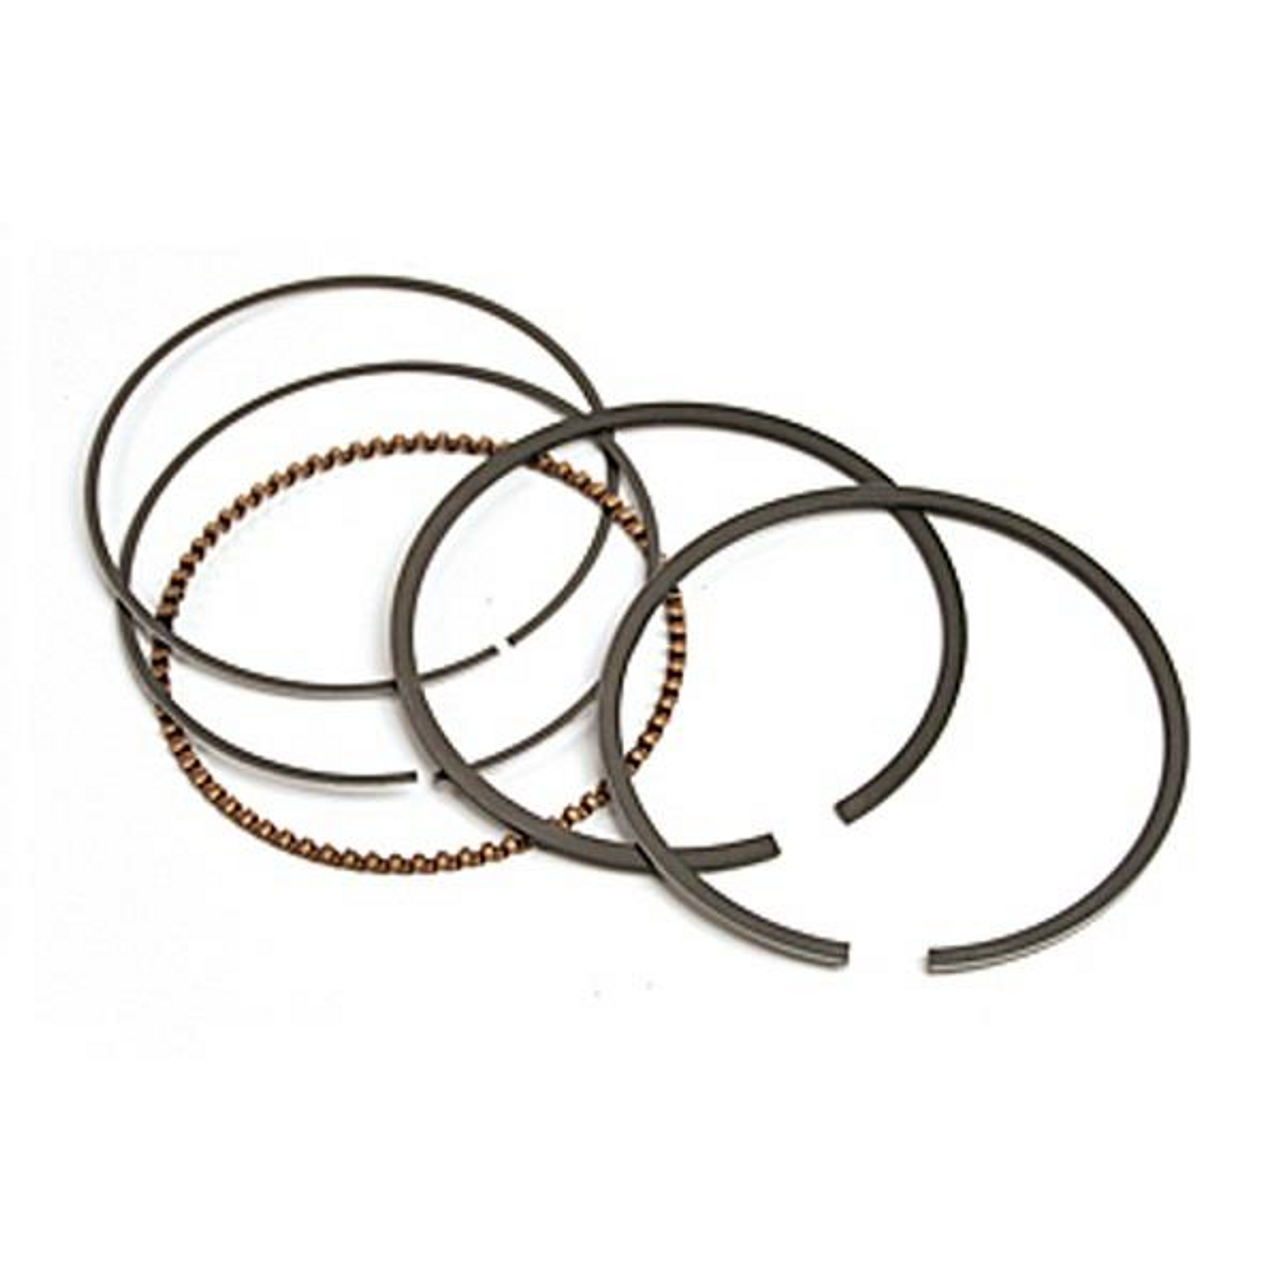 Club Car Piston Rings Only (FE400 Engines), 2839, 1022703-01